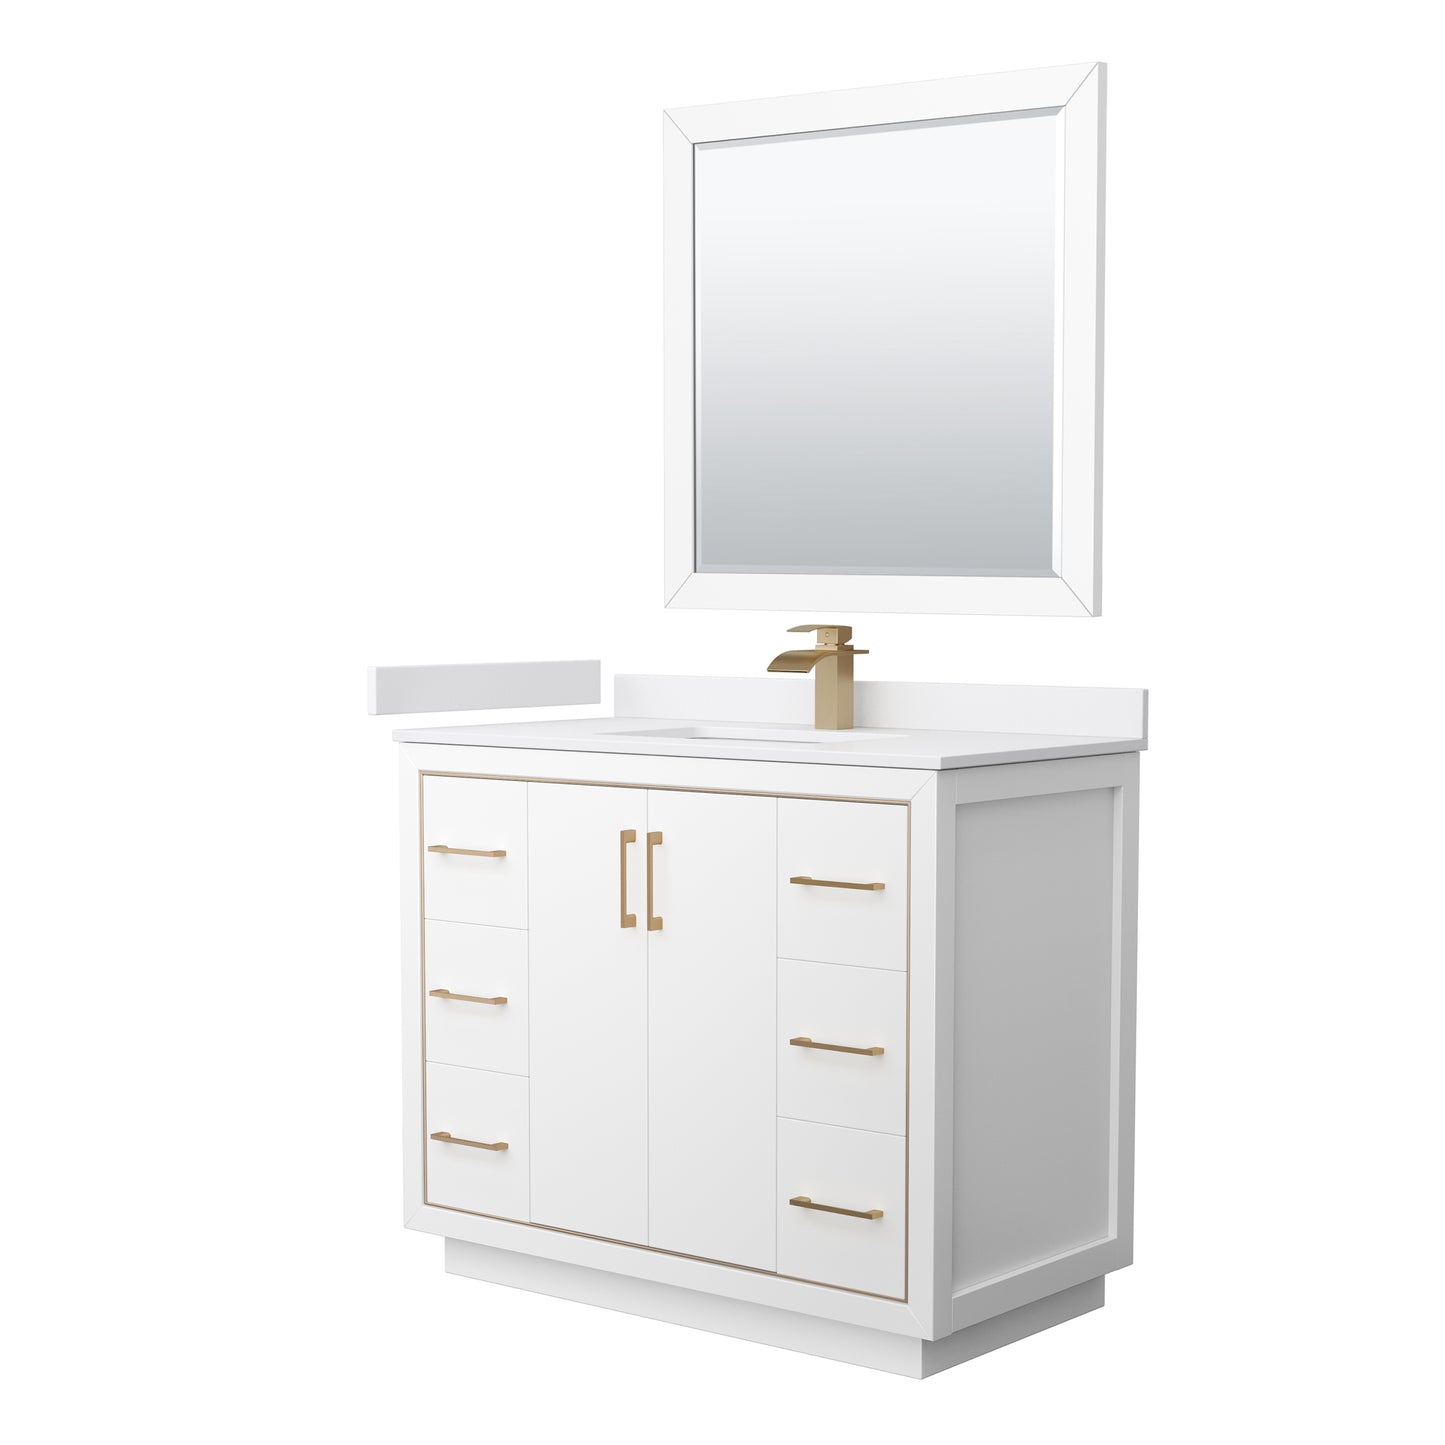 Wyndham Icon 42 Inch Single Bathroom Vanity in White with White Cultured Marble Countertop, Undermount Square Sink, Satin Bronze Trim and 34 Inch Mirror - Luxe Bathroom Vanities